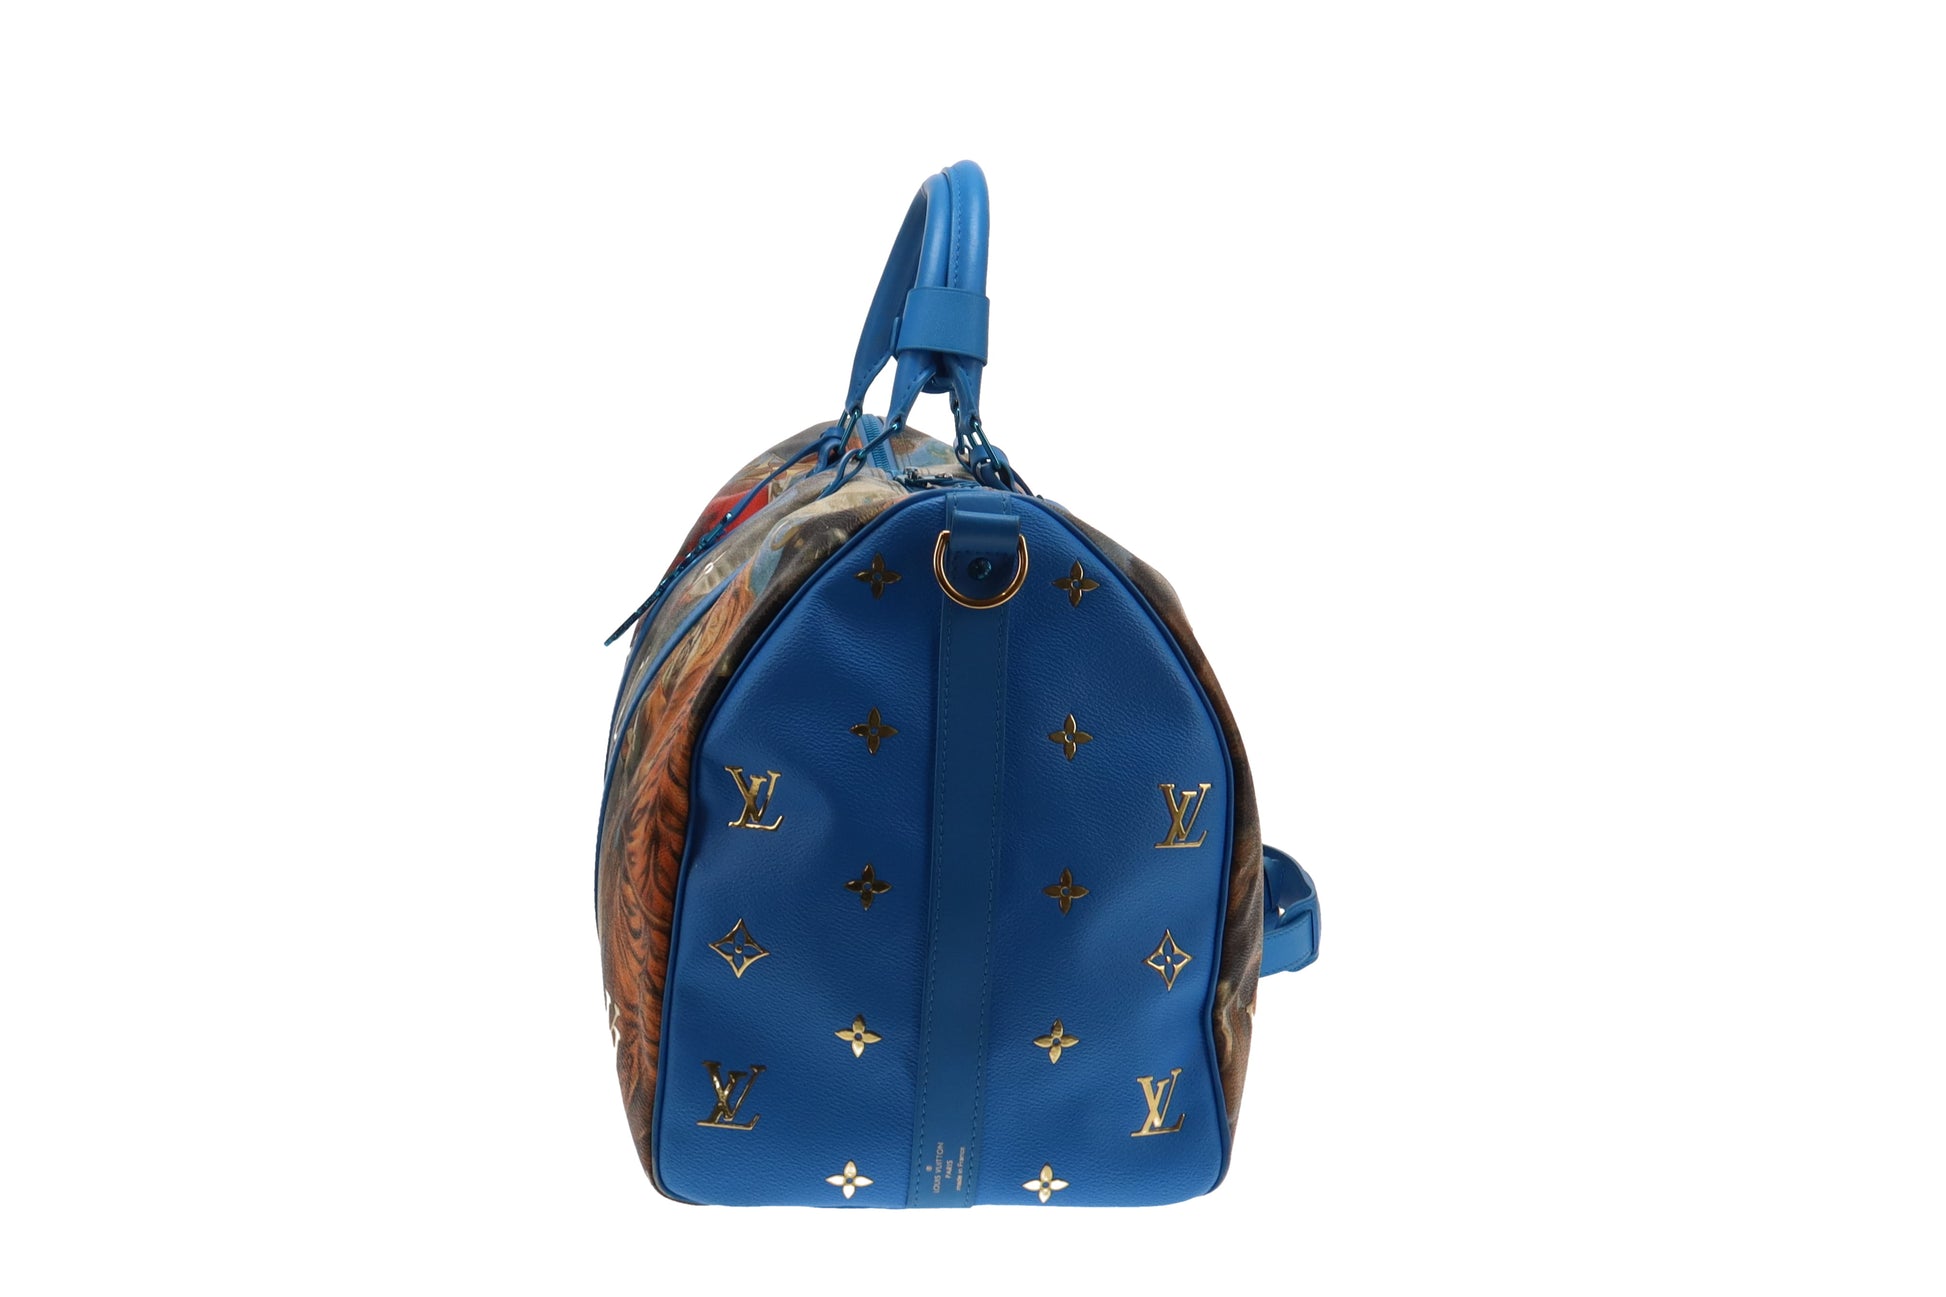 Louis Vuitton Limited Edition Coated Canvas Jeff Koons Rubens Keepall 50  Bandouliere Bag - Yoogi's Closet